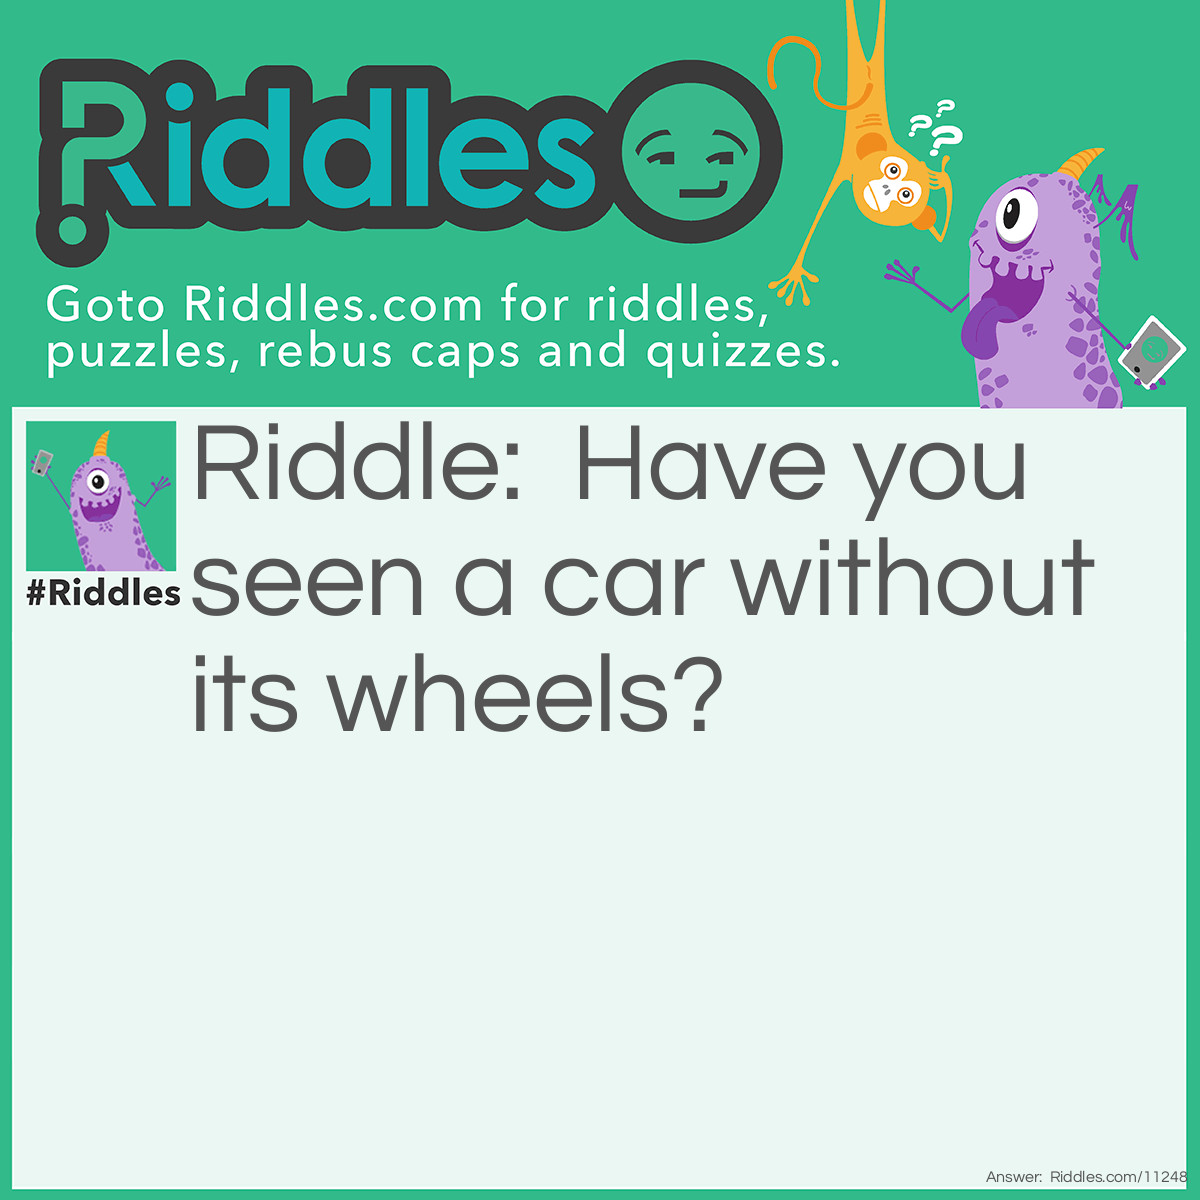 Riddle: Have you seen a car without its wheels? Answer: It's totally unwheel!